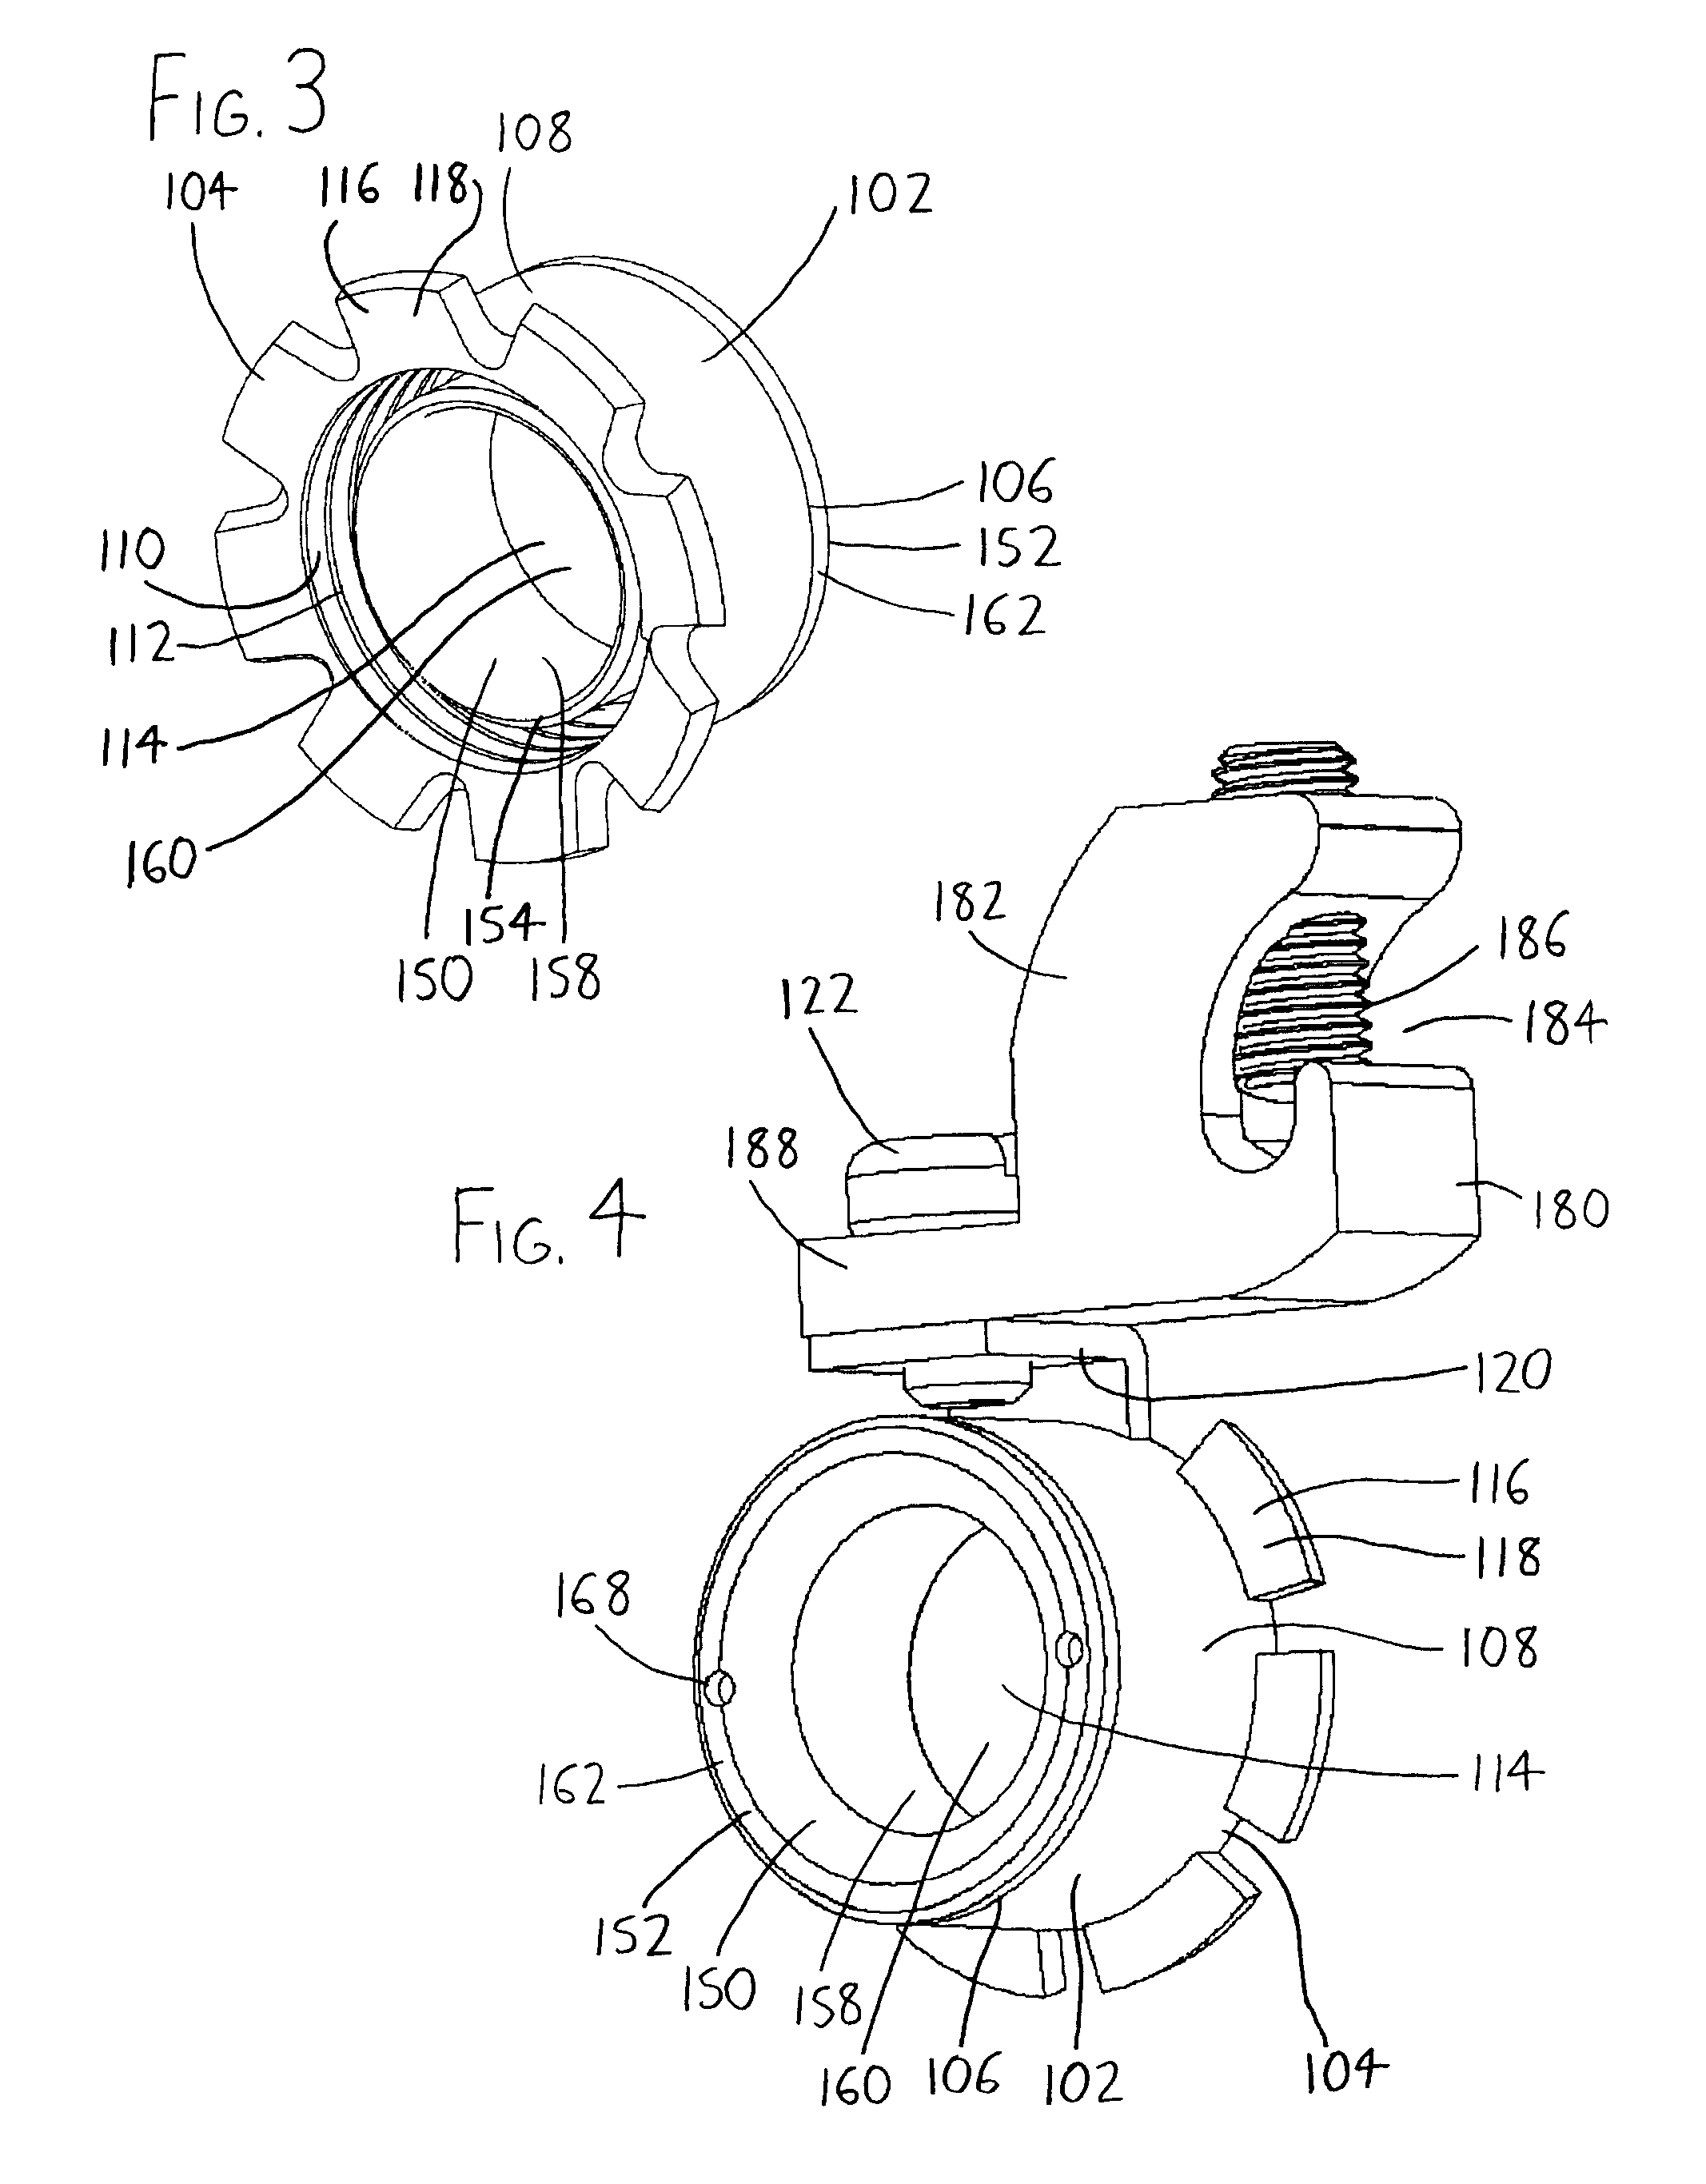 Connector / bushing assembly for electrical junction boxes